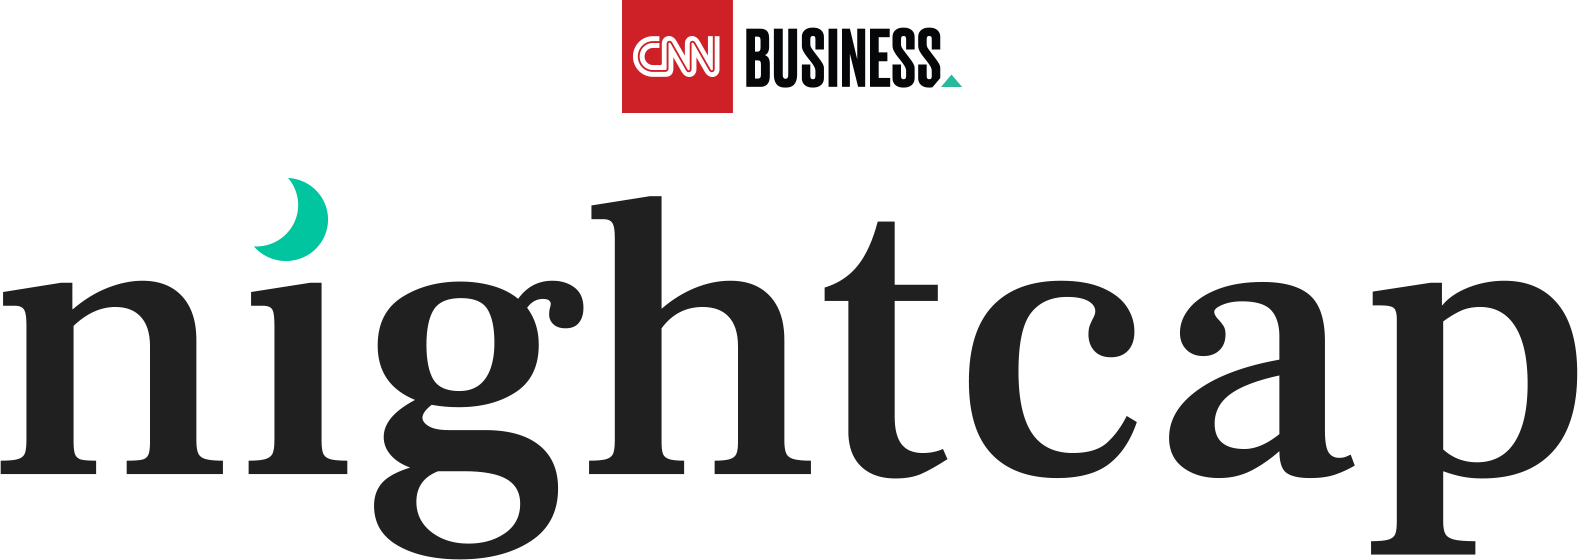 After Hours Stock Quotes CNN